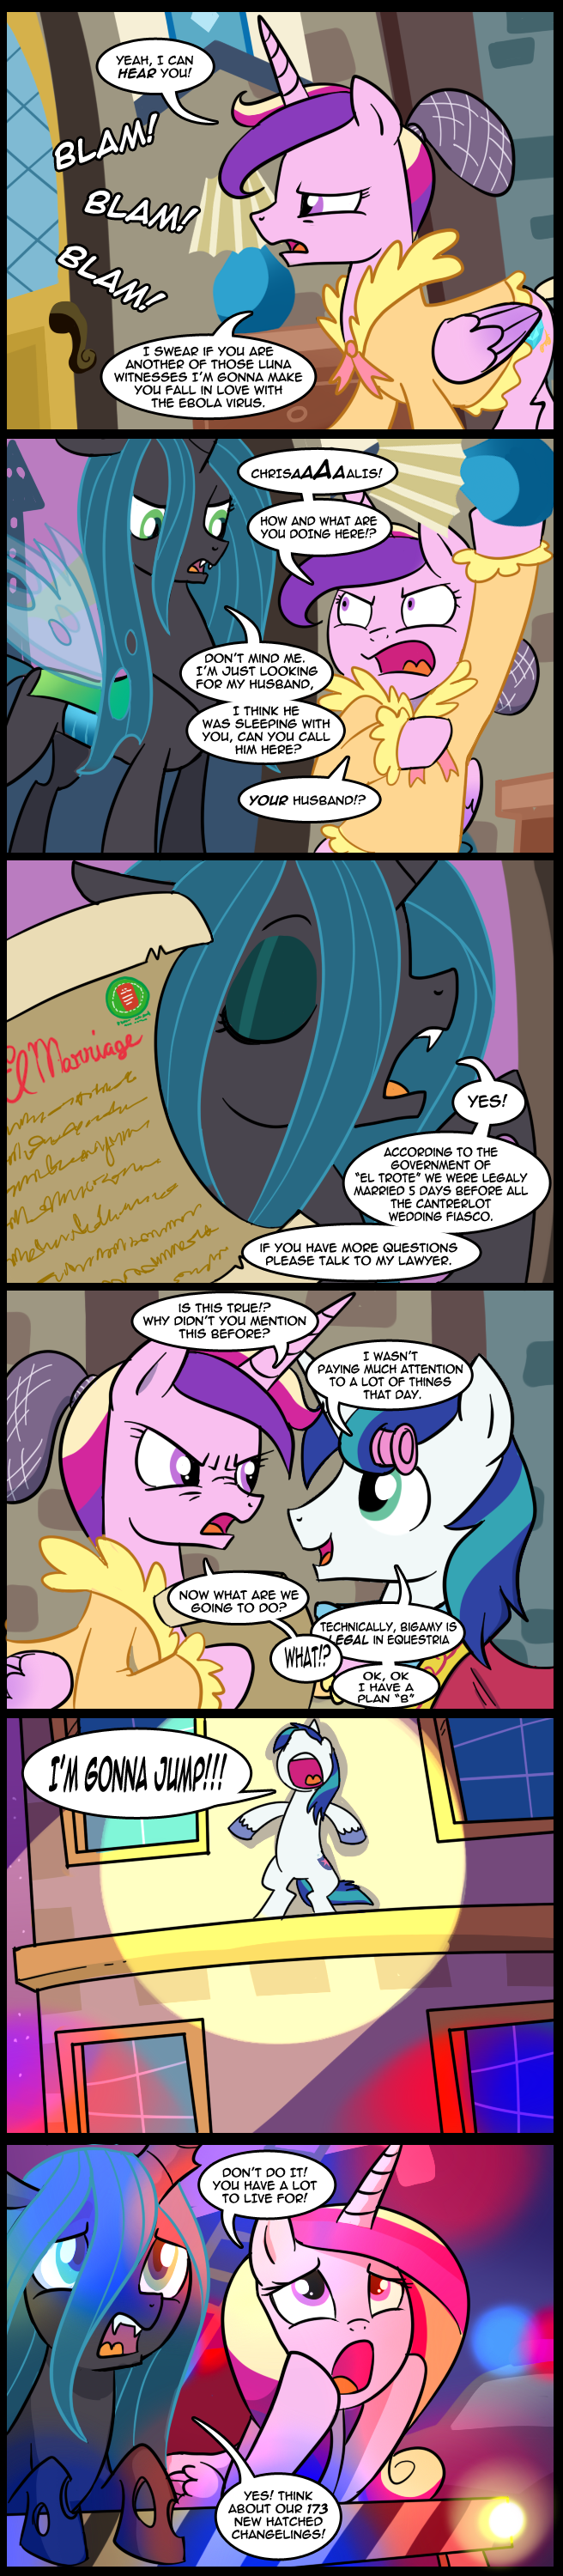 married_again_by_csimadmax-d5dxzqu.png